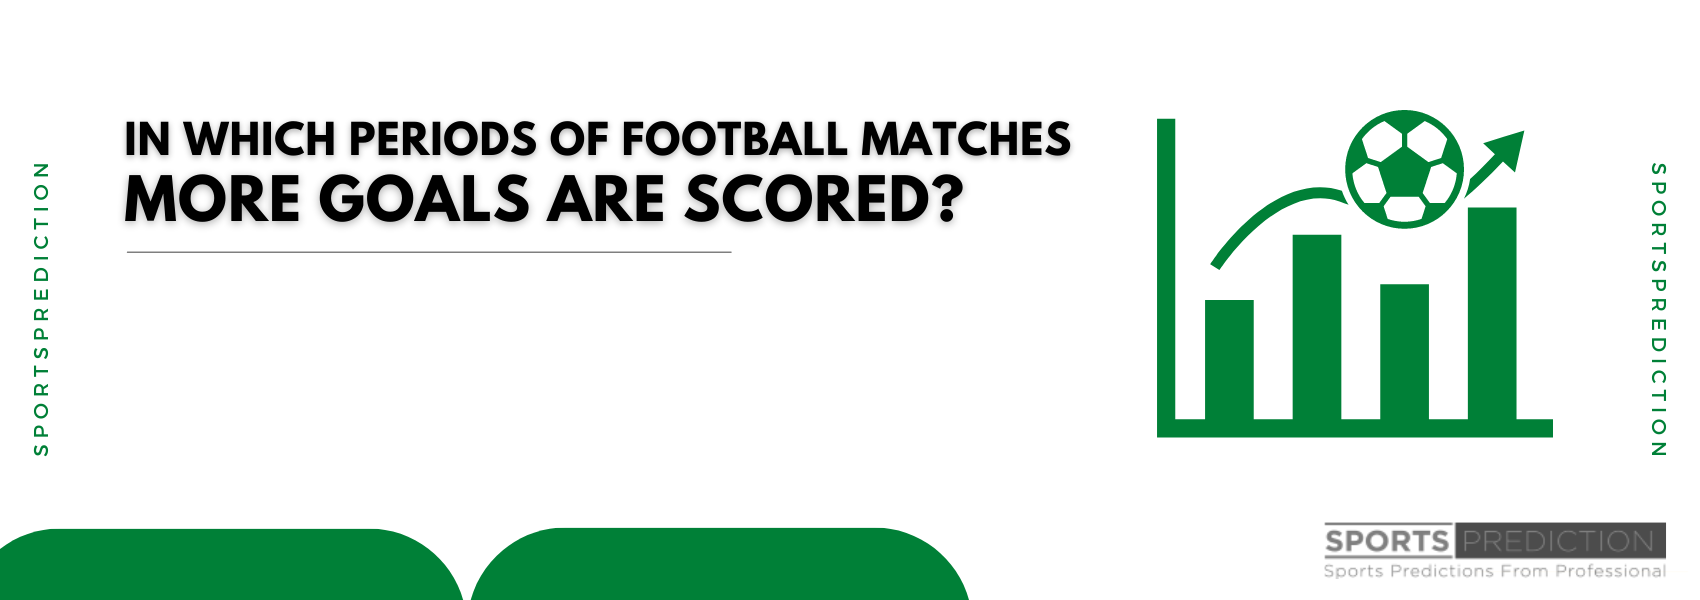 In which periods of football matches more goals are scored?